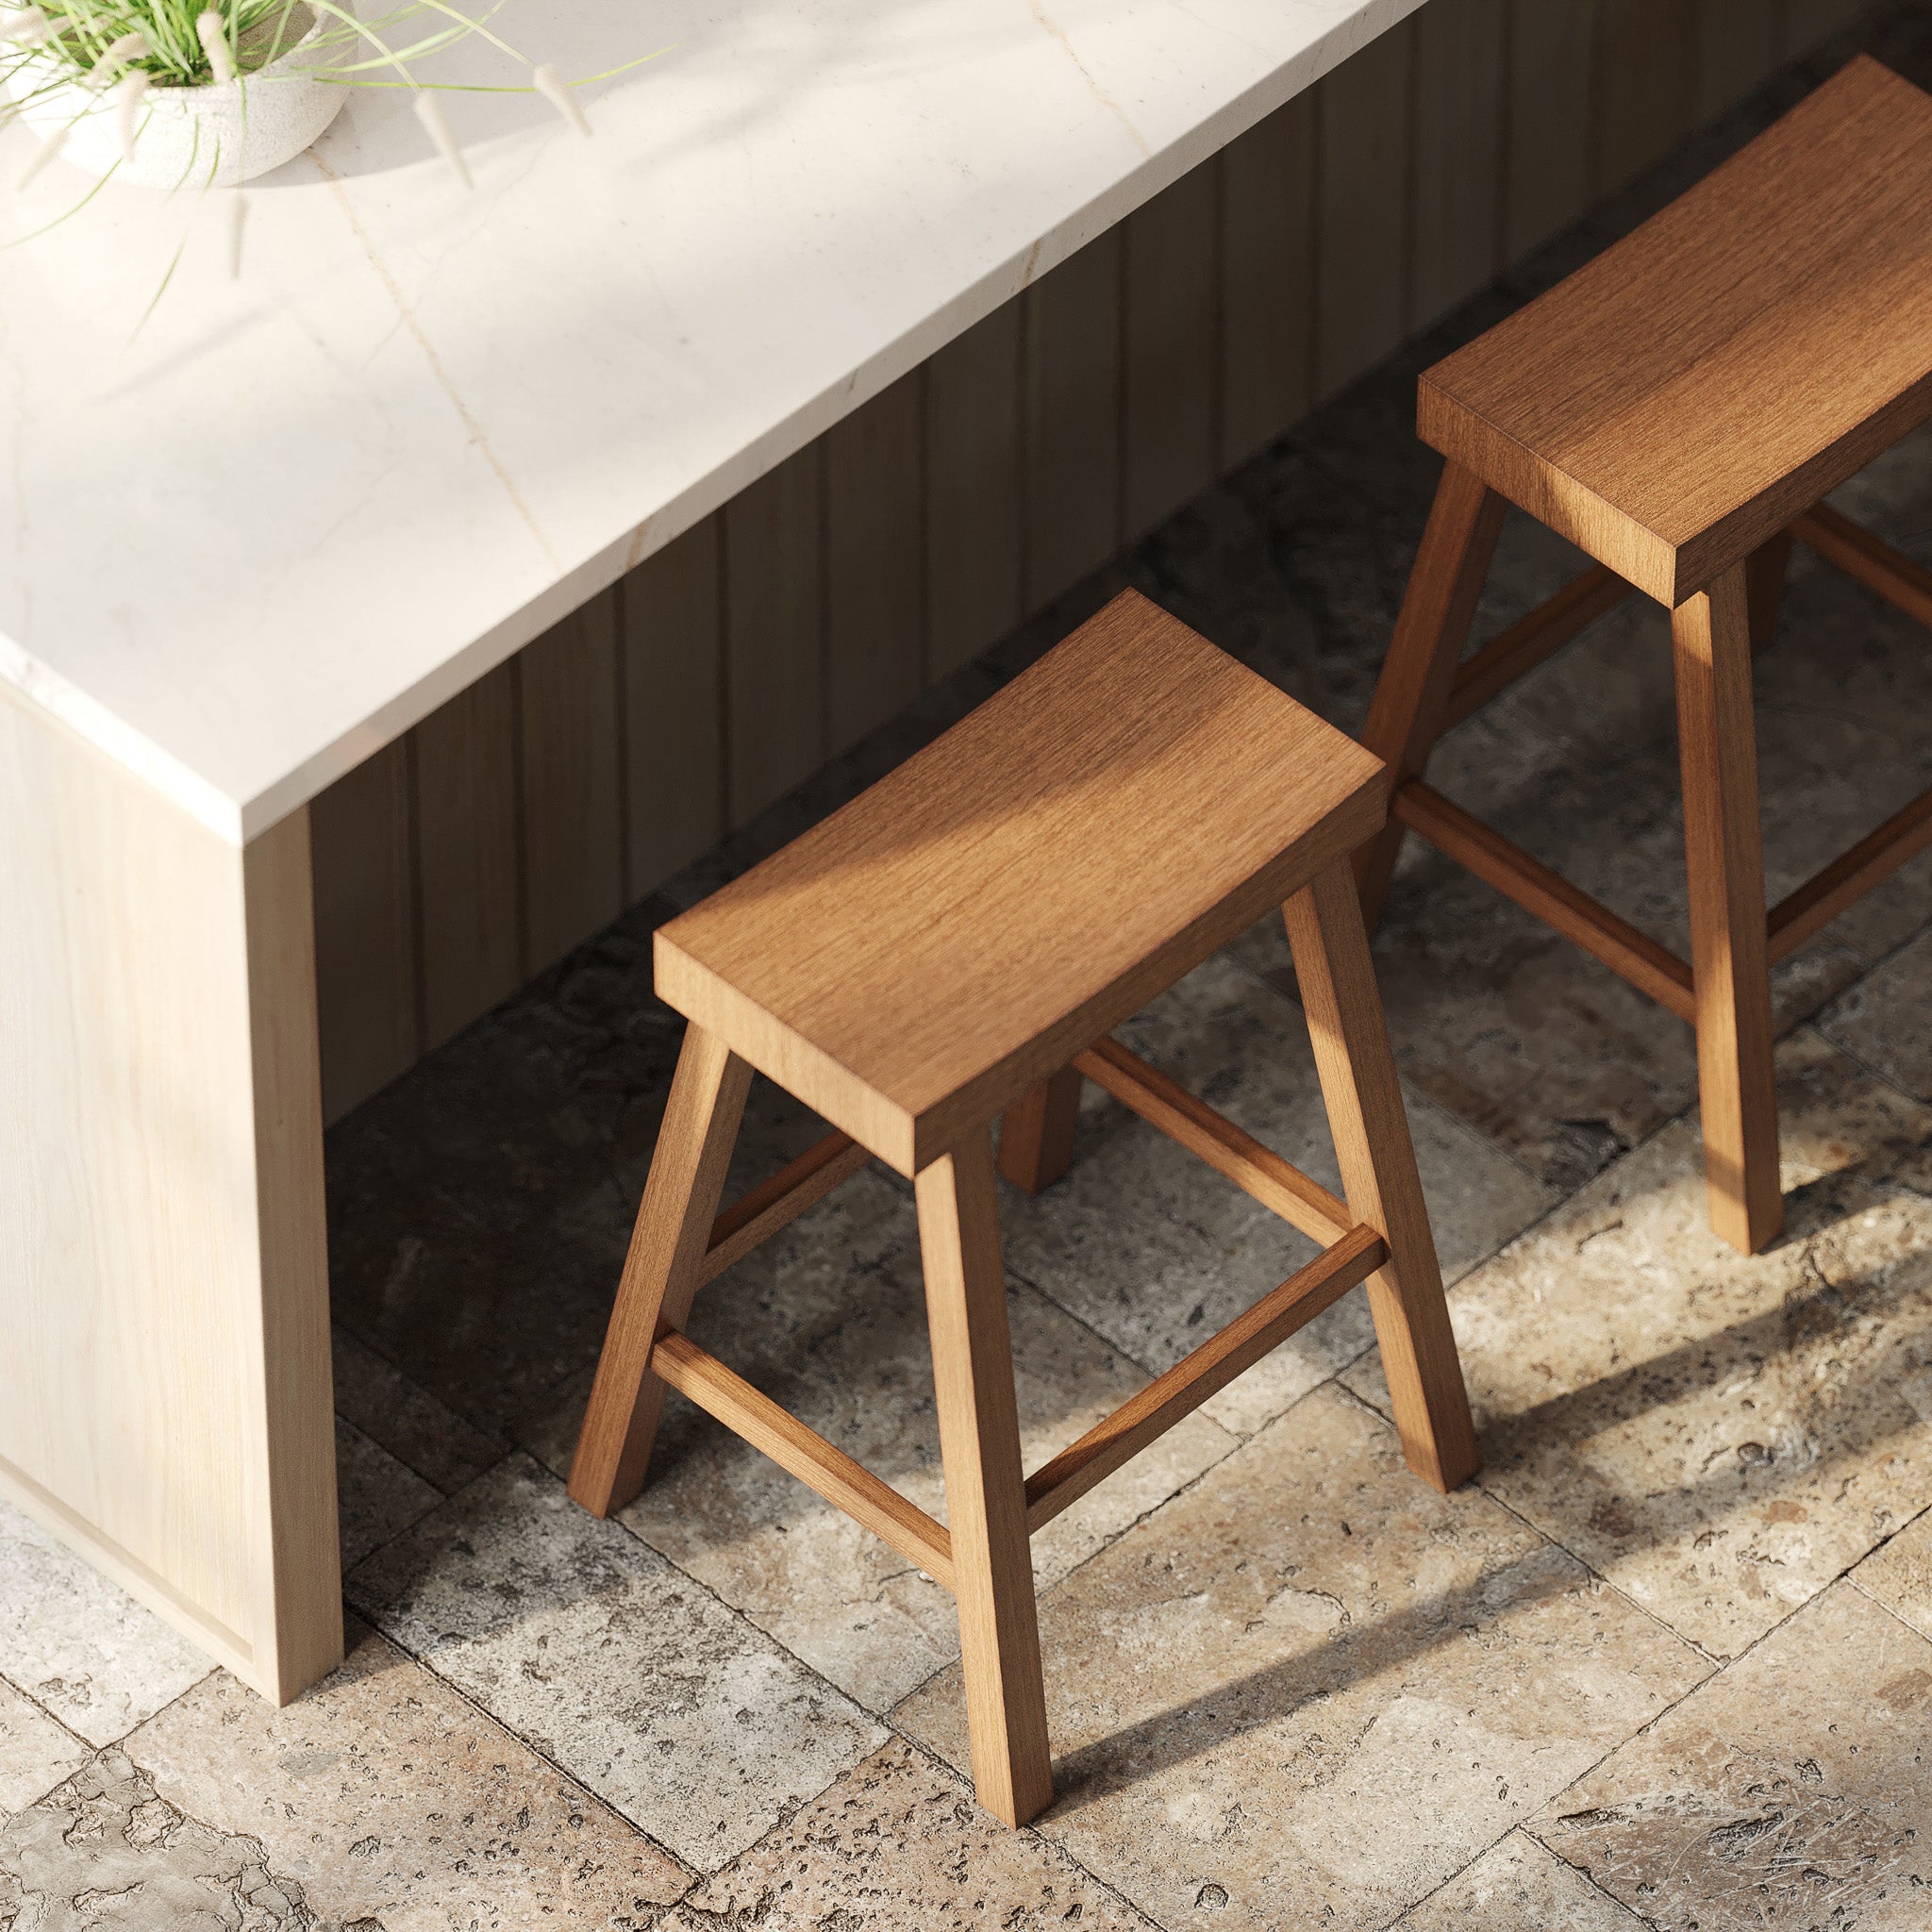 Vincent Counter Stool in Antiqued Natural Finish in Stools by Maven Lane